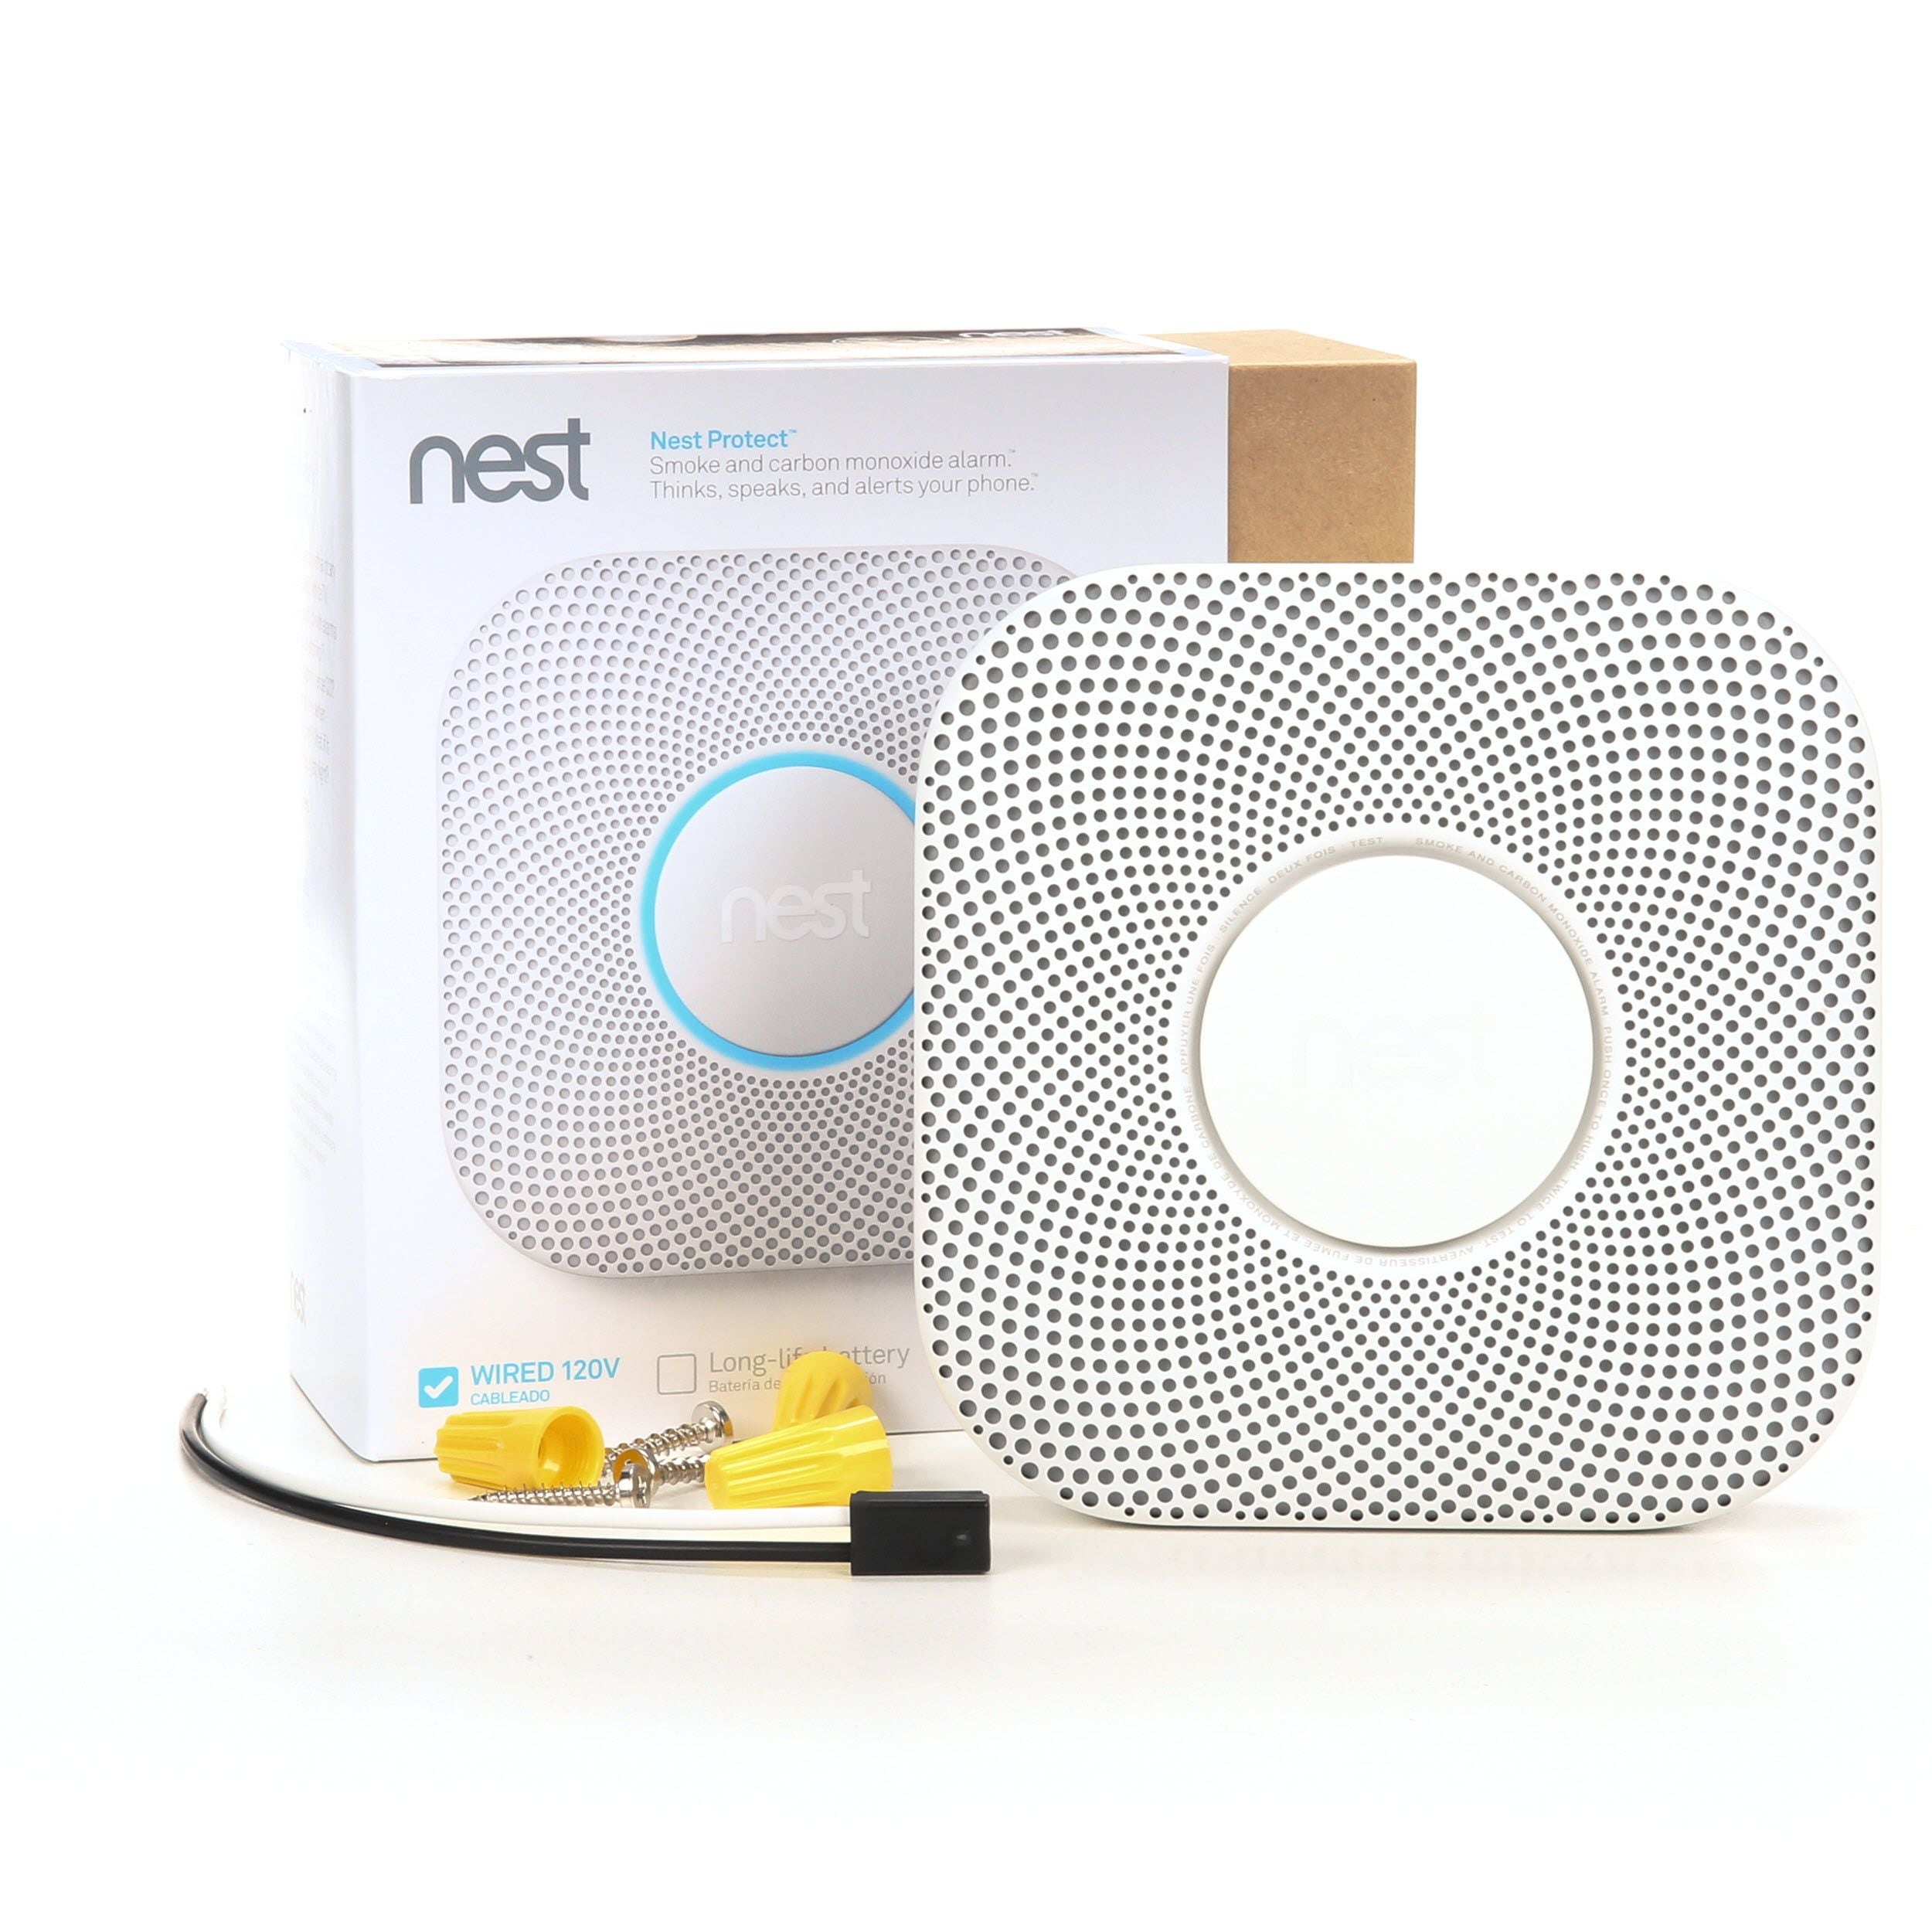 Nest Protect Smoke Carbon Monoxide Alarm NEW 2nd Generation Wired S3003LWES 